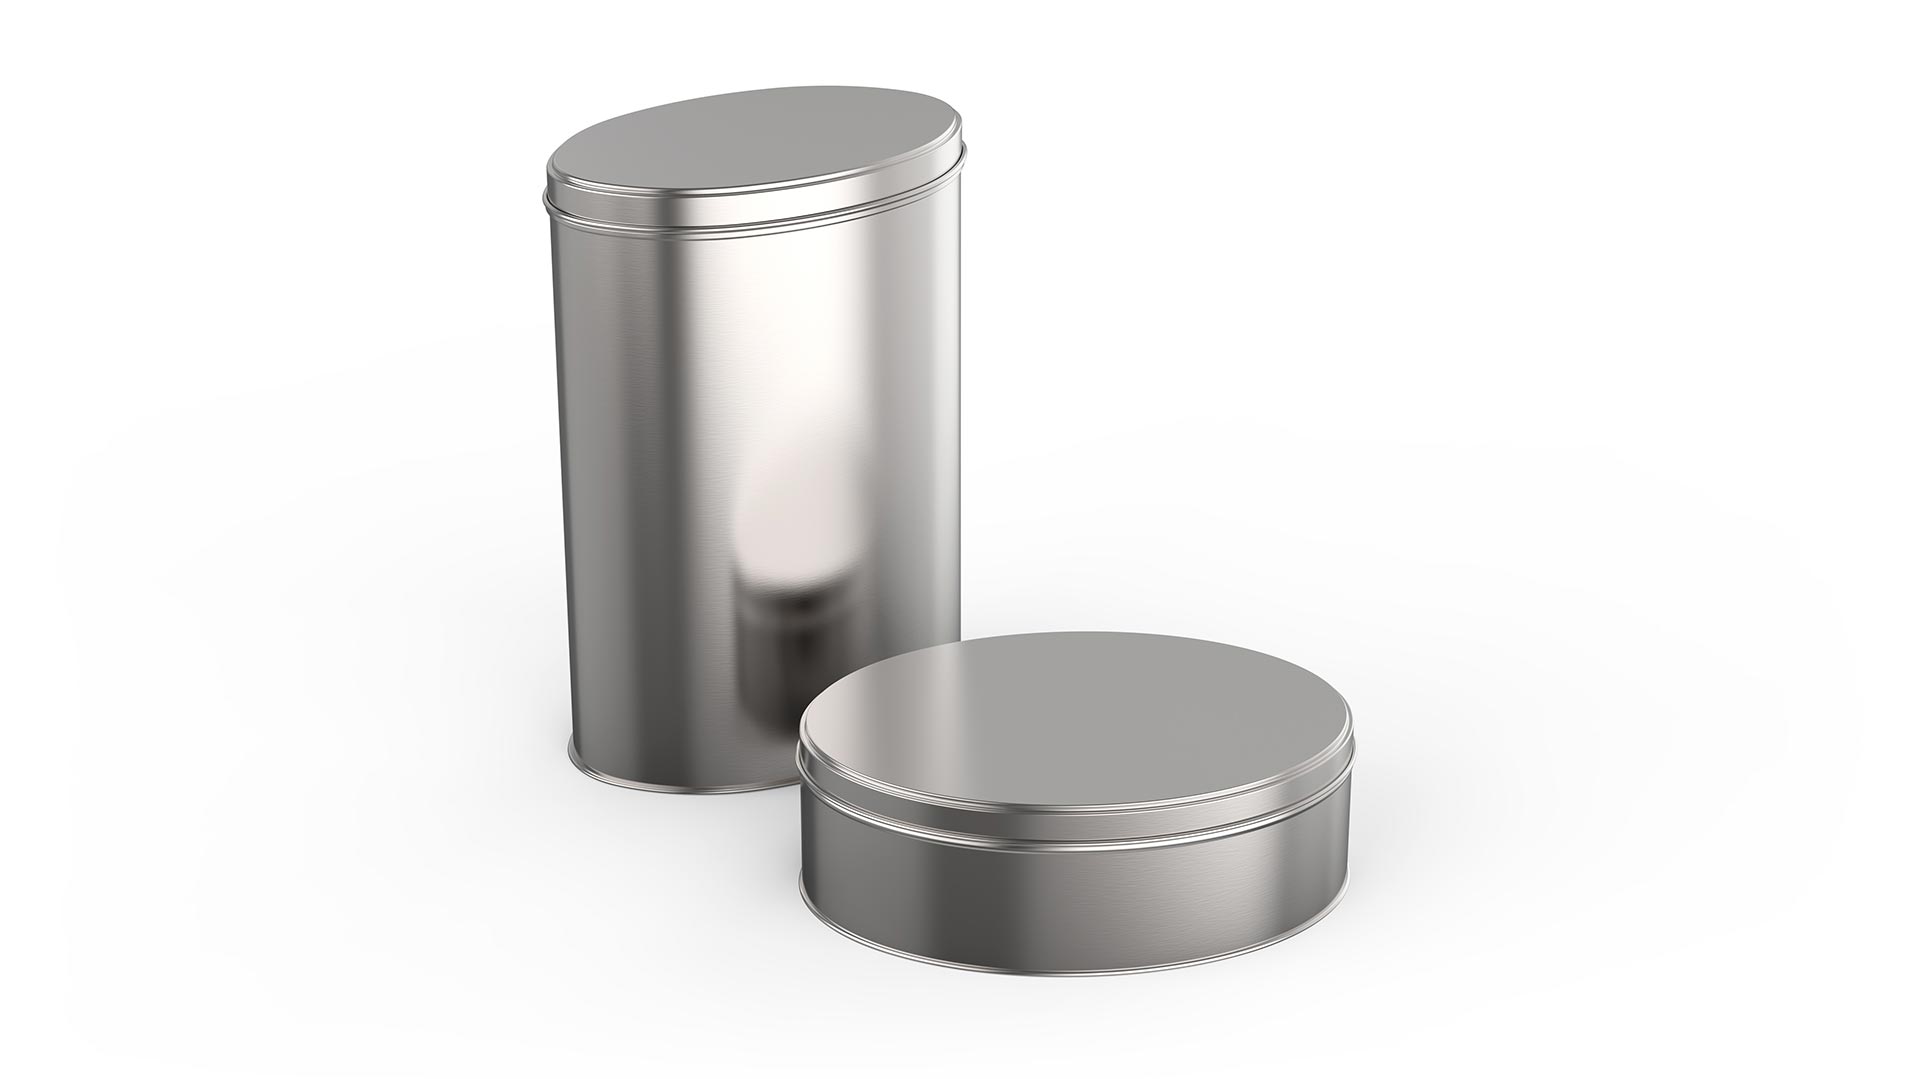 Two silver oval tins stand next to each other.